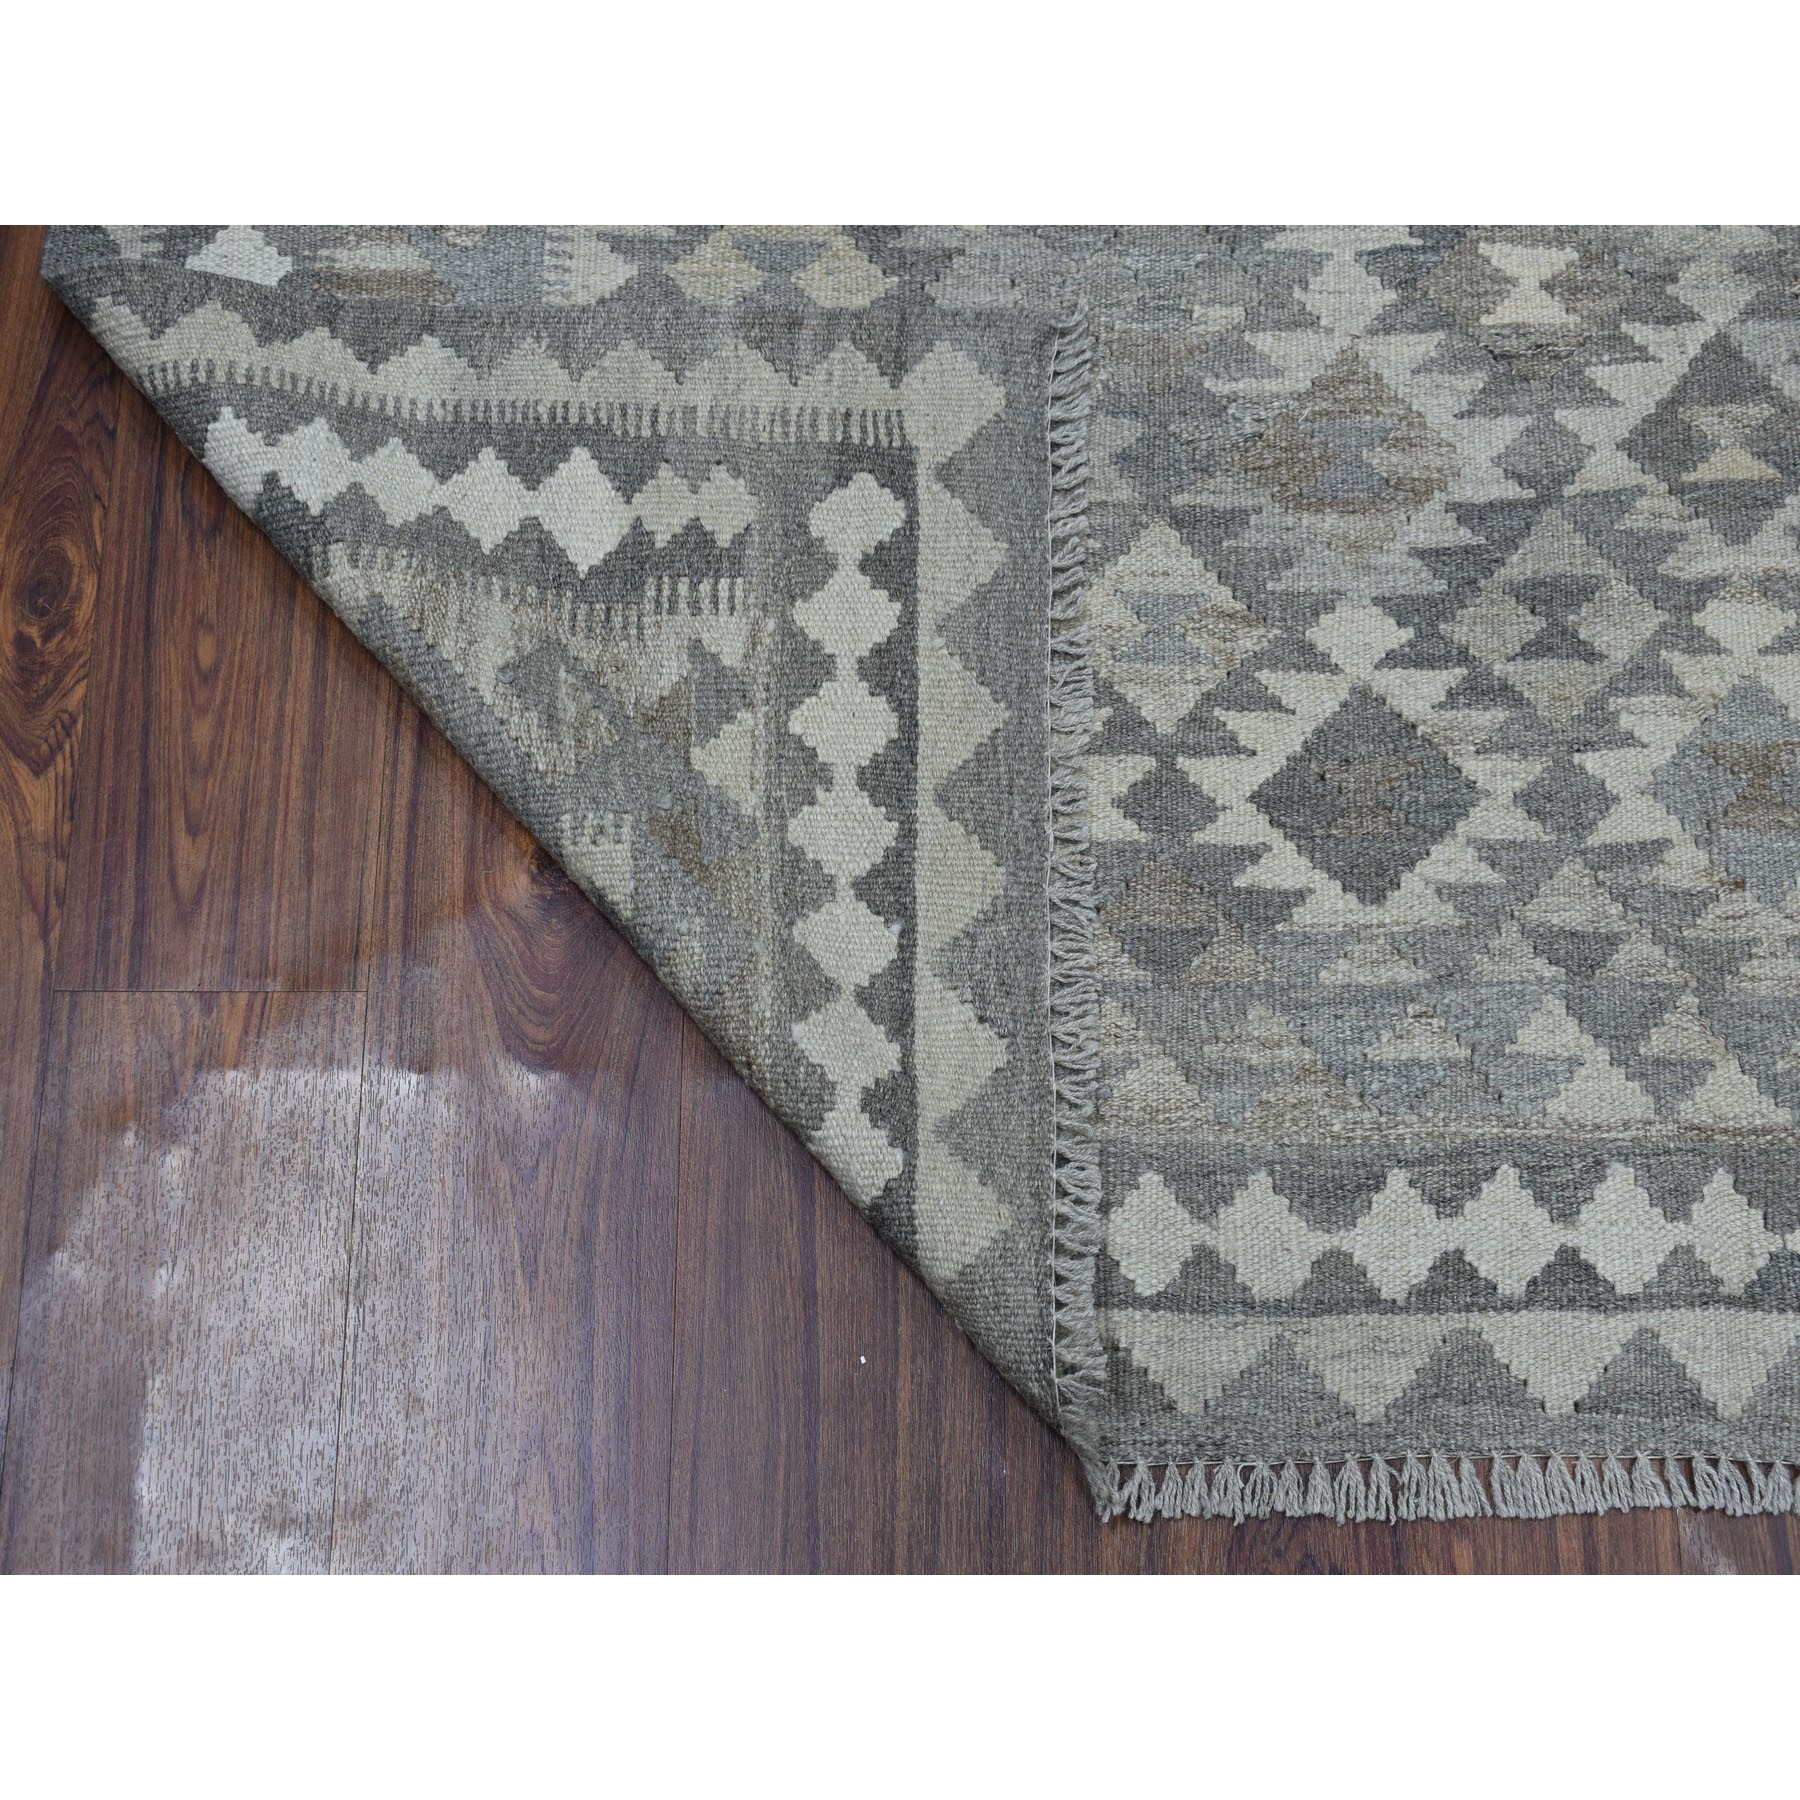 5-7 x8- Undyed Reversible Natural Wool Afghan Kilim Hand Woven Oriental Rug 